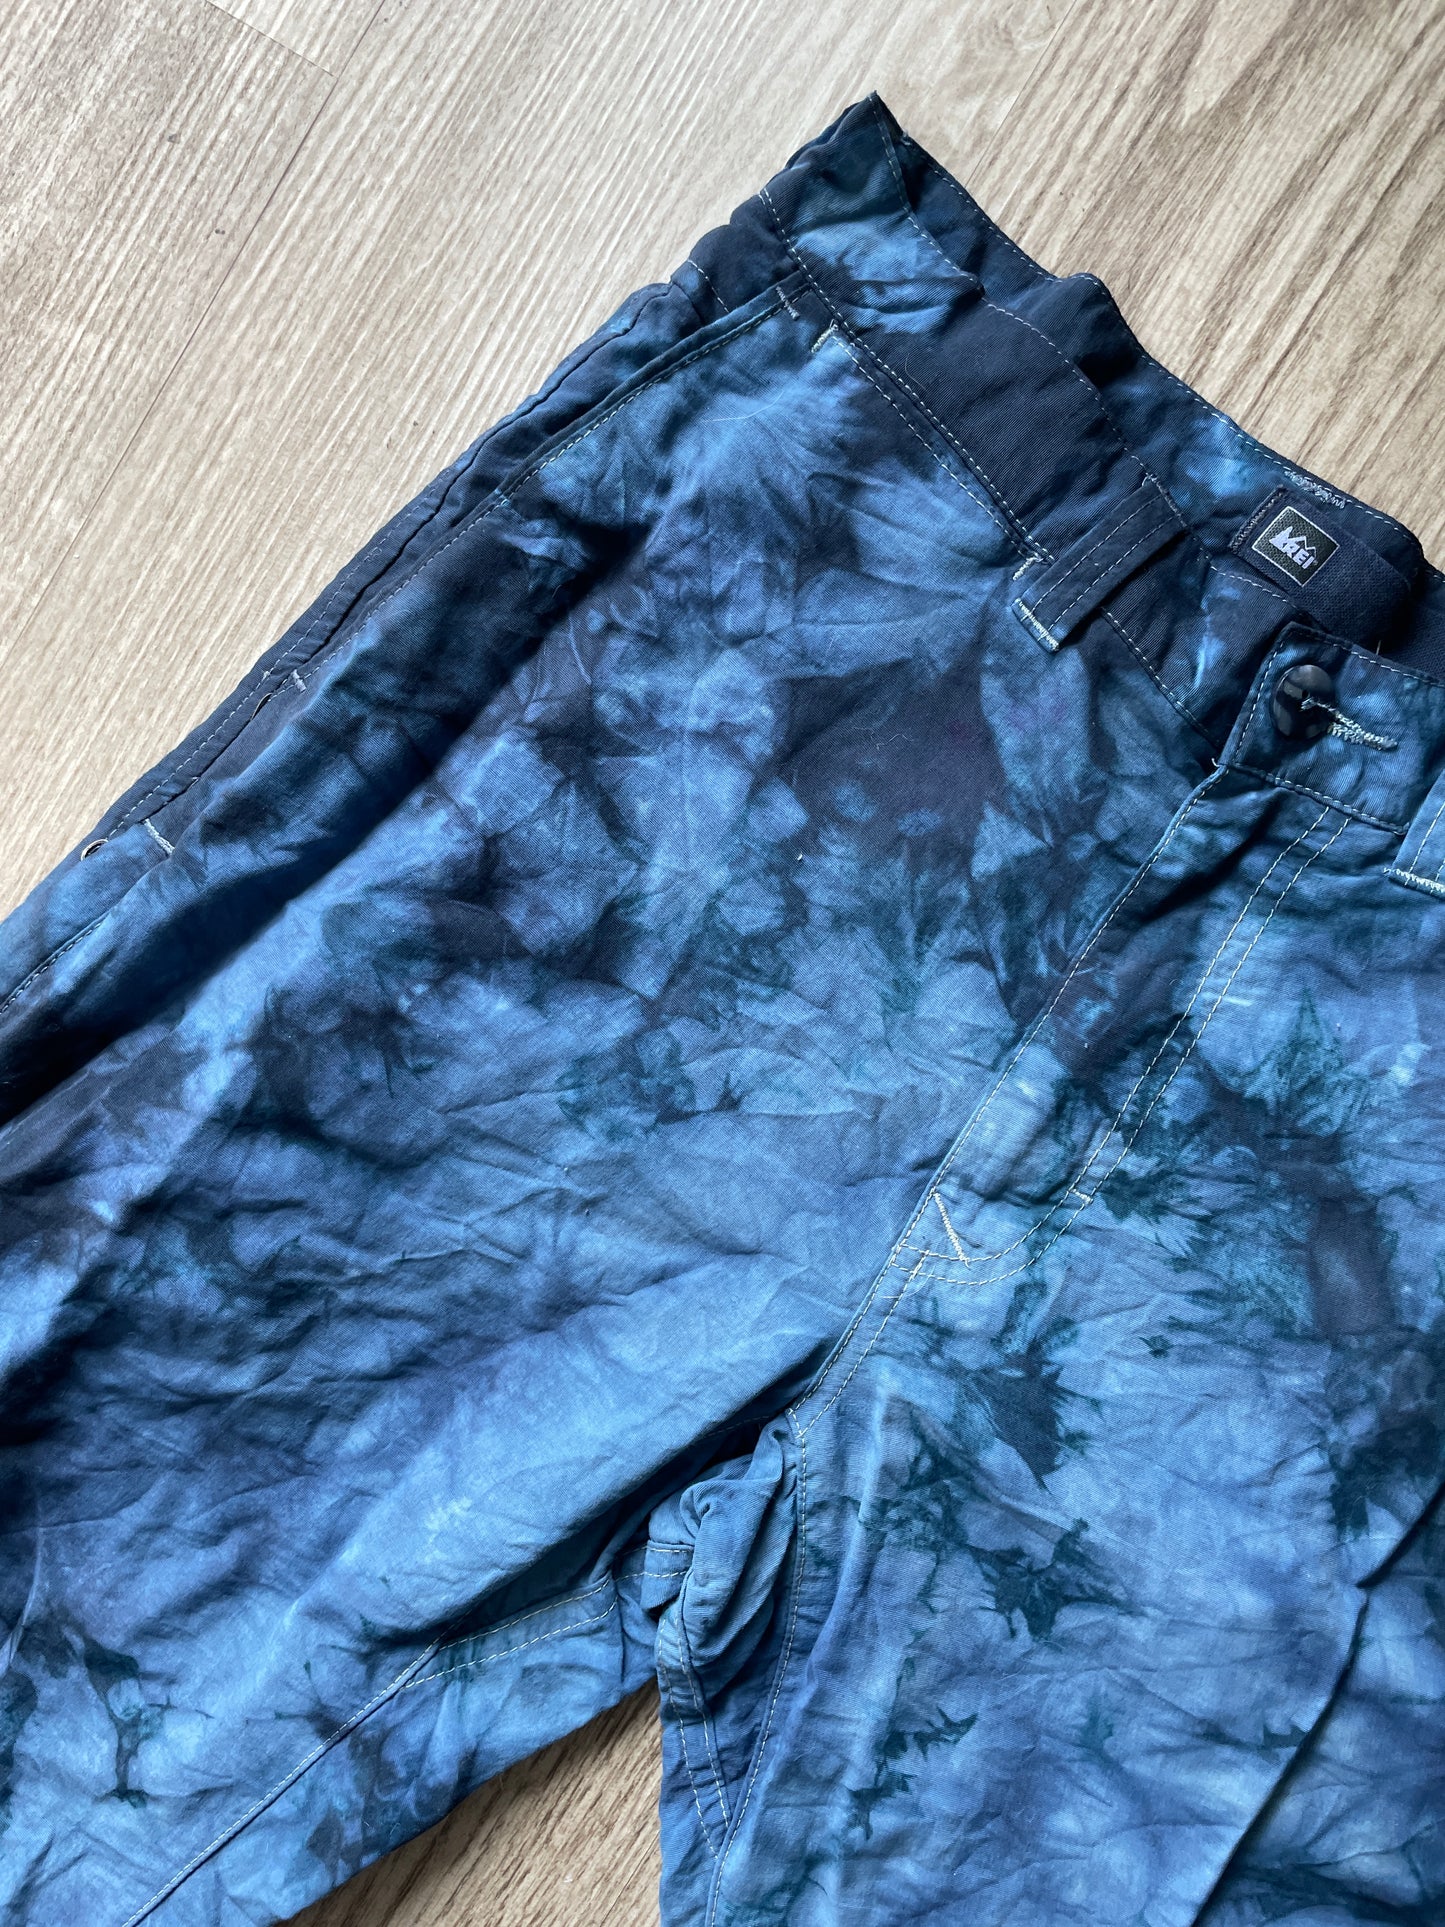 Unisex Tie Dye REI Climbing Pants | One-Of-a-Kind Upcycled Black and Gray Crumpled Pants